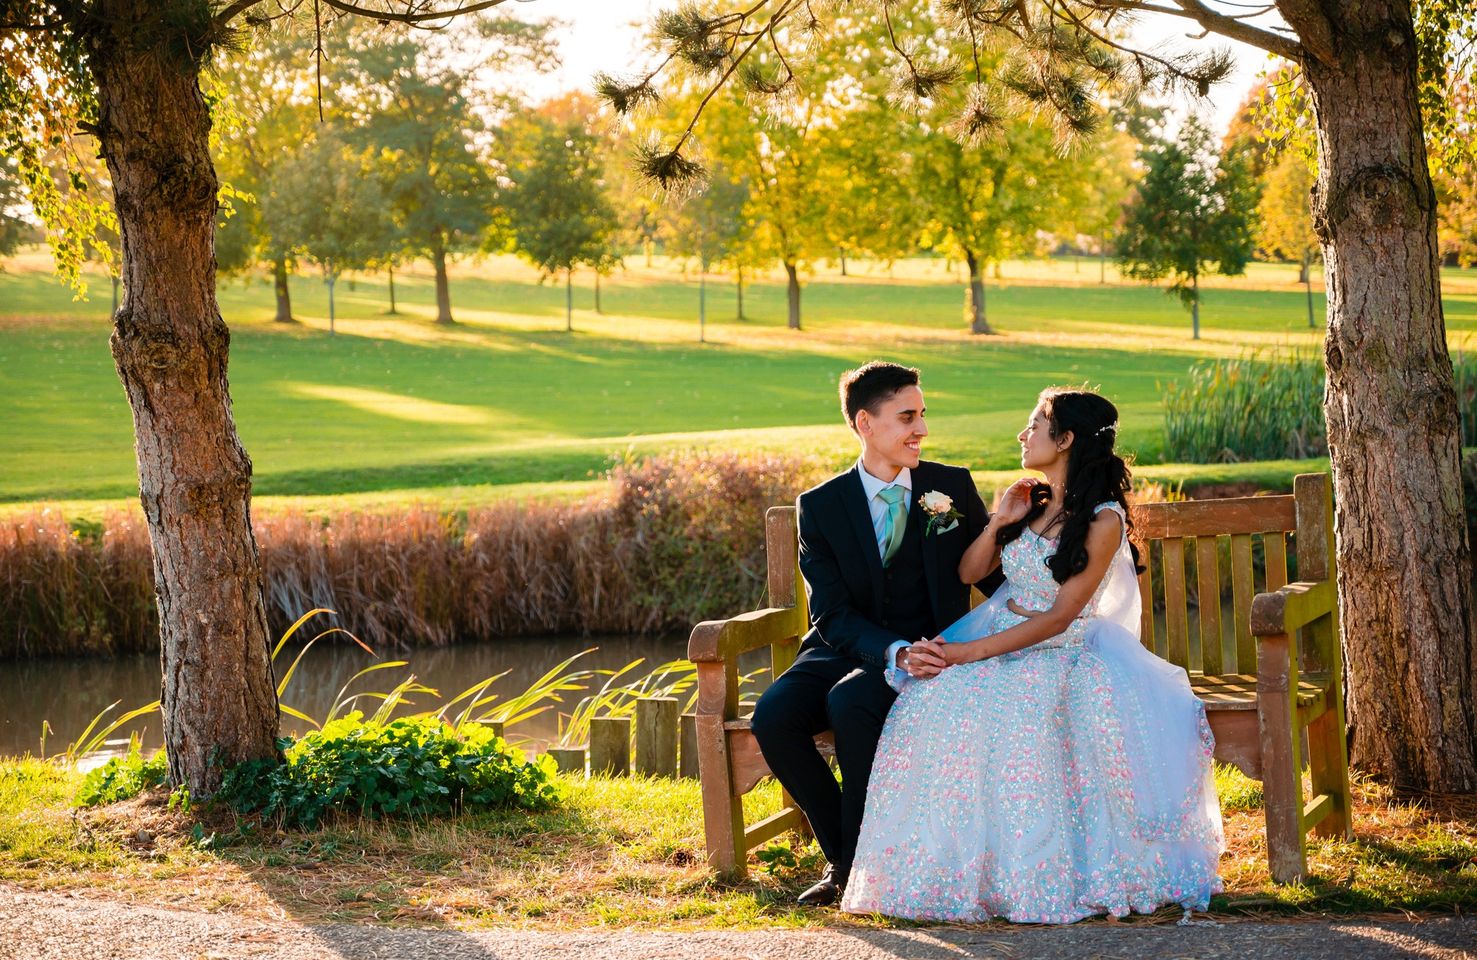 How to Choose the Perfect Wedding Venue in Westmidlands